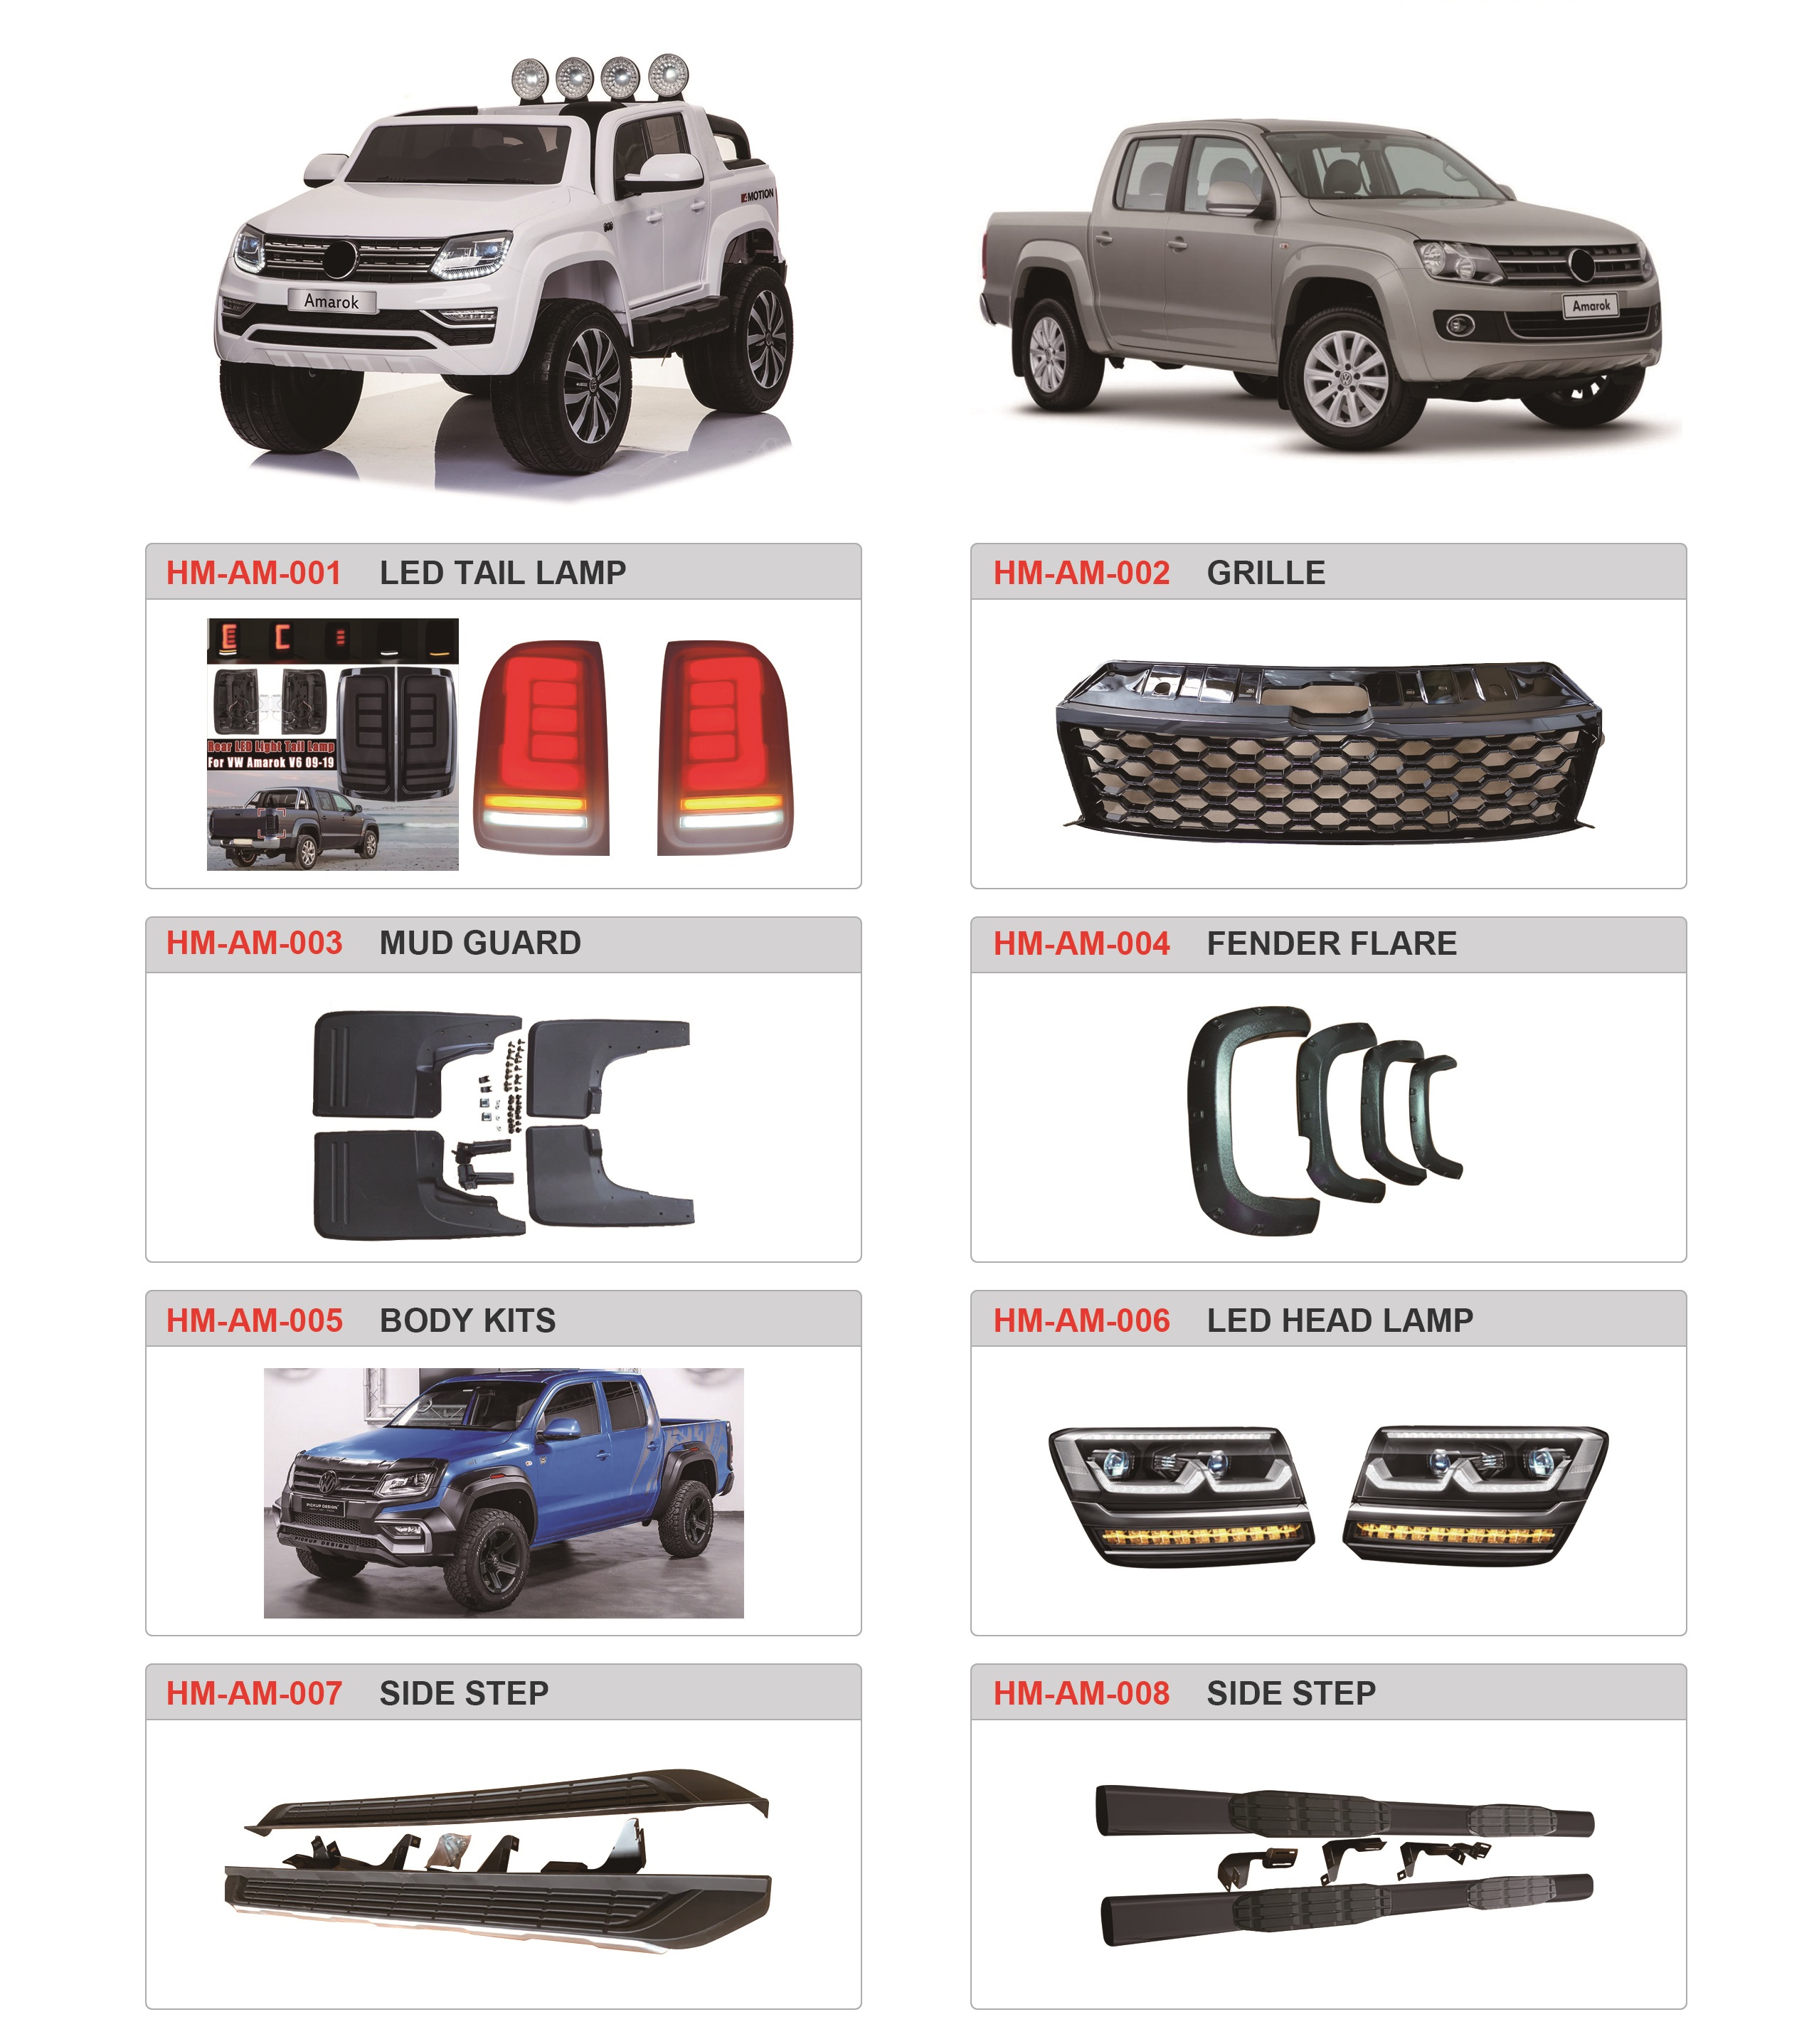 FOR AMAROK LED TAIL LAMP Featured Image